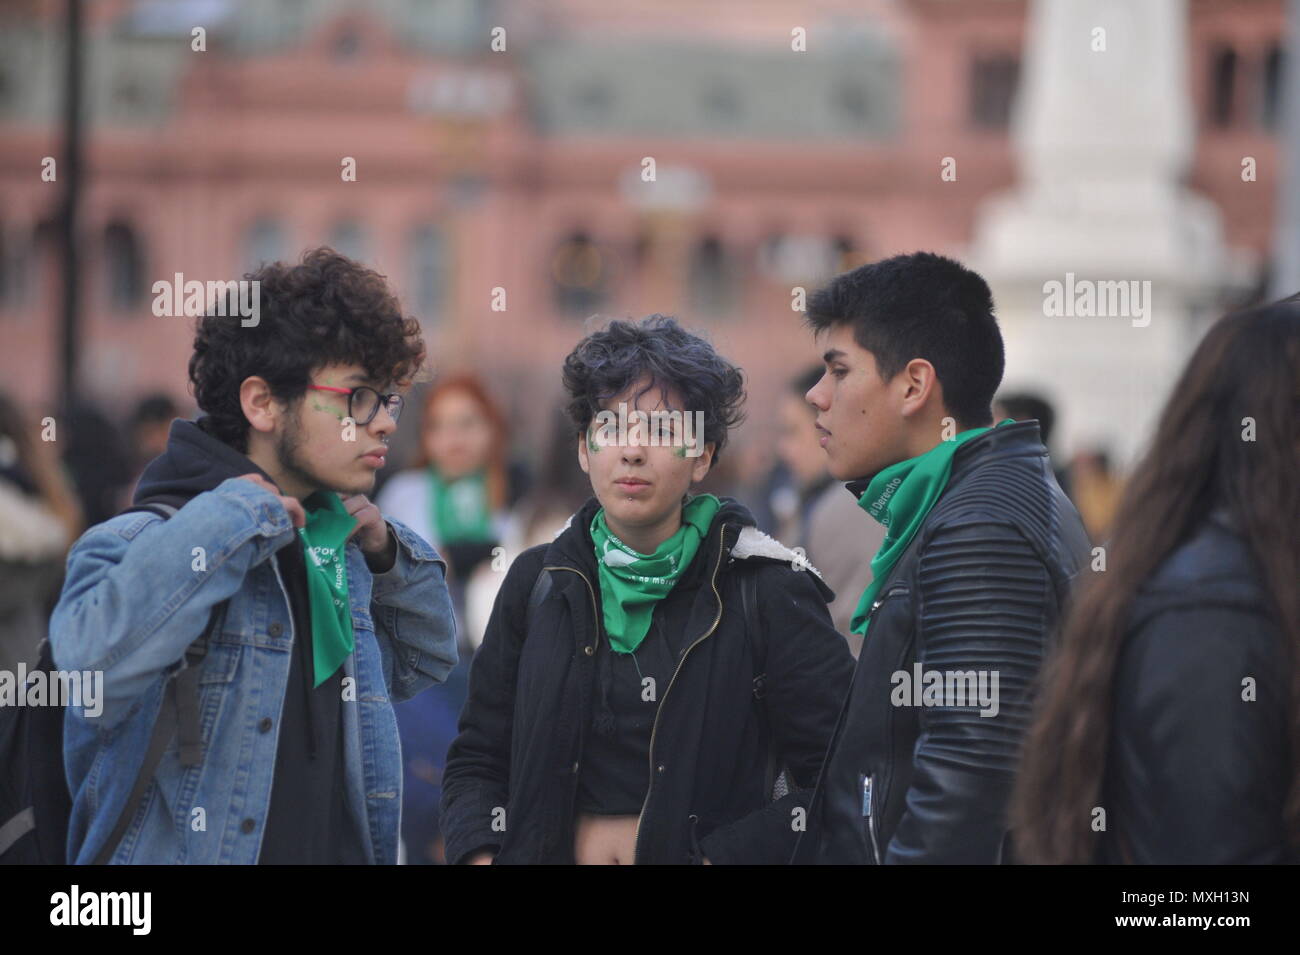 Buenos Aires, Buenos Aires, Argentina. 4th June, 2018. Demonstrators, most of them bearing the pro legal abortion campaign symbol, a green kerchief, gather at May Square prior to the ''Ni una menos'' rally. ''Ni una menos'', Spanish for ''Not one woman less'' is an Argentine feminist movement that started in 2015 after the murder of 14 years old Chiara Paez, and is now spread across several Latin American countries, campaigning against gender violence. Credit: Patricio Murphy/ZUMA Wire/Alamy Live News Stock Photo